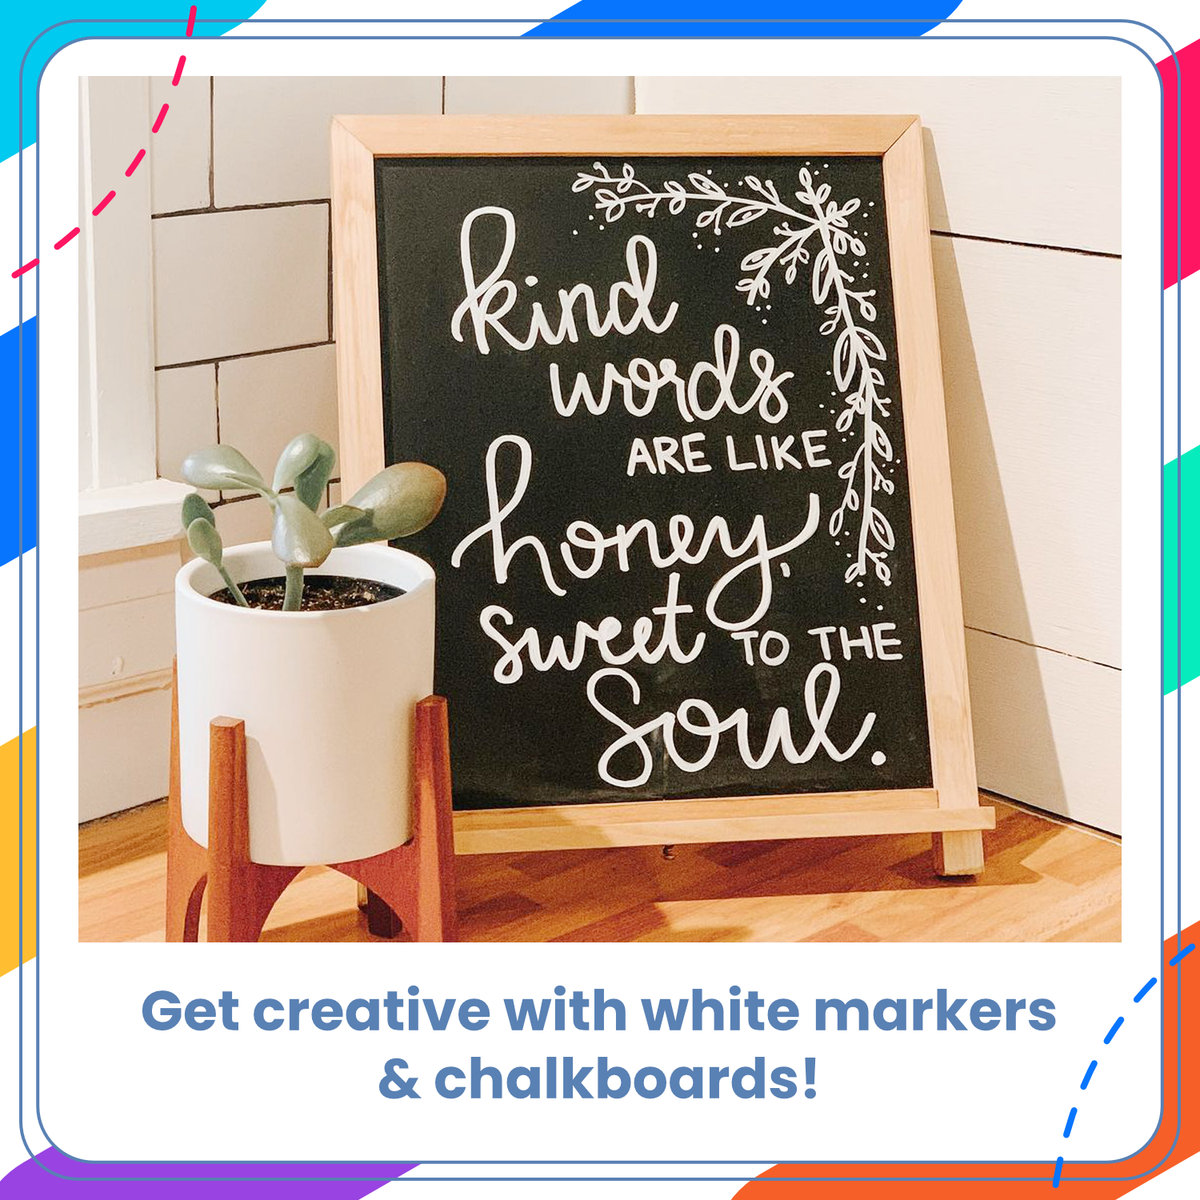 White Chalk Markers with Fine and Jumbo Nibs - Variety Pack of 5 Pens